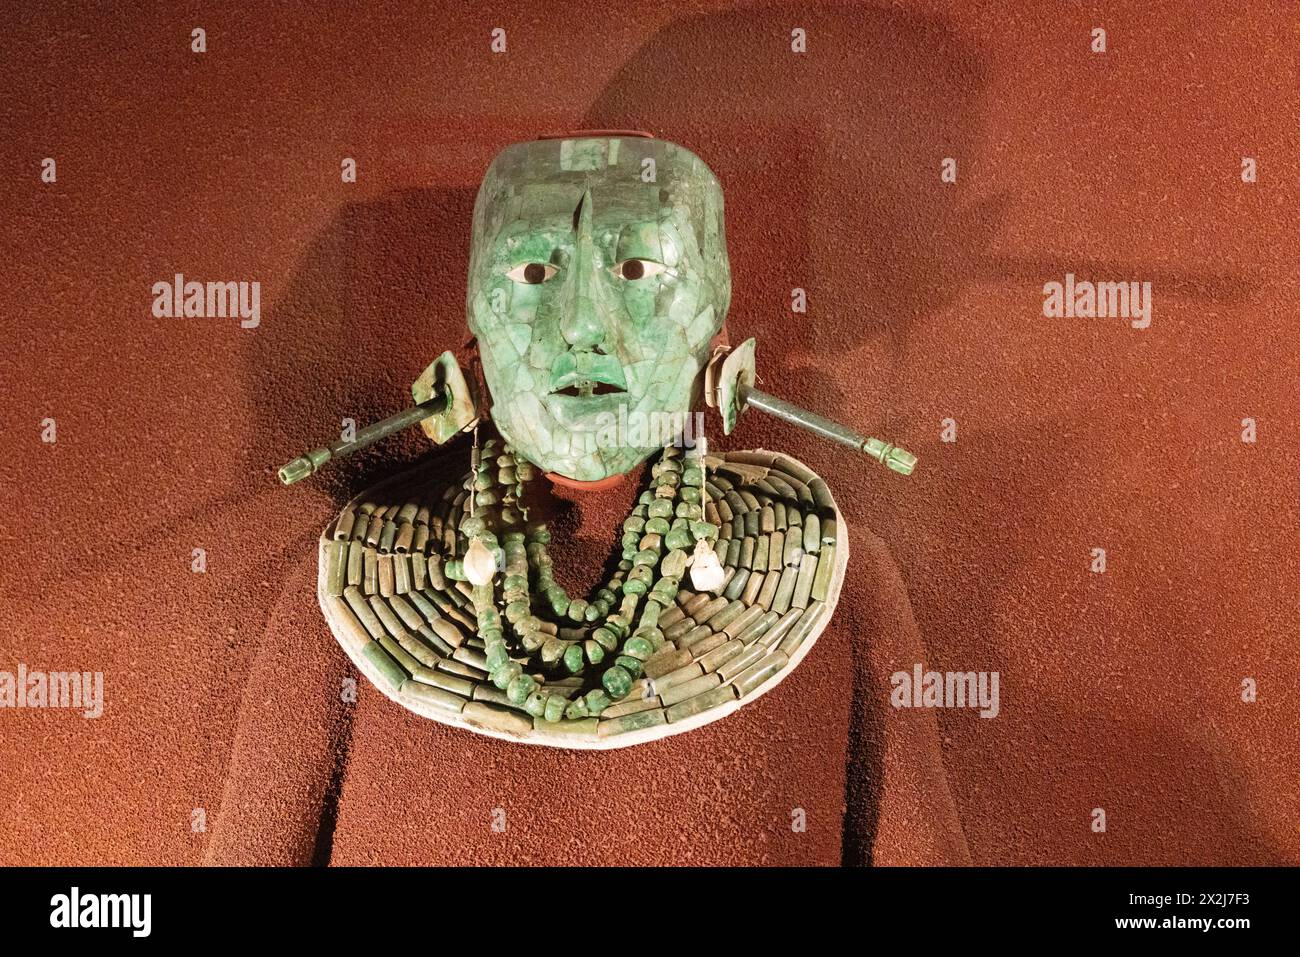 Jade death mask and other effects of Pakal the Great aka Pacal, Mayan King 603-683 AD; originally interred at Palenque, Mexico. Maya artifacts, Stock Photo